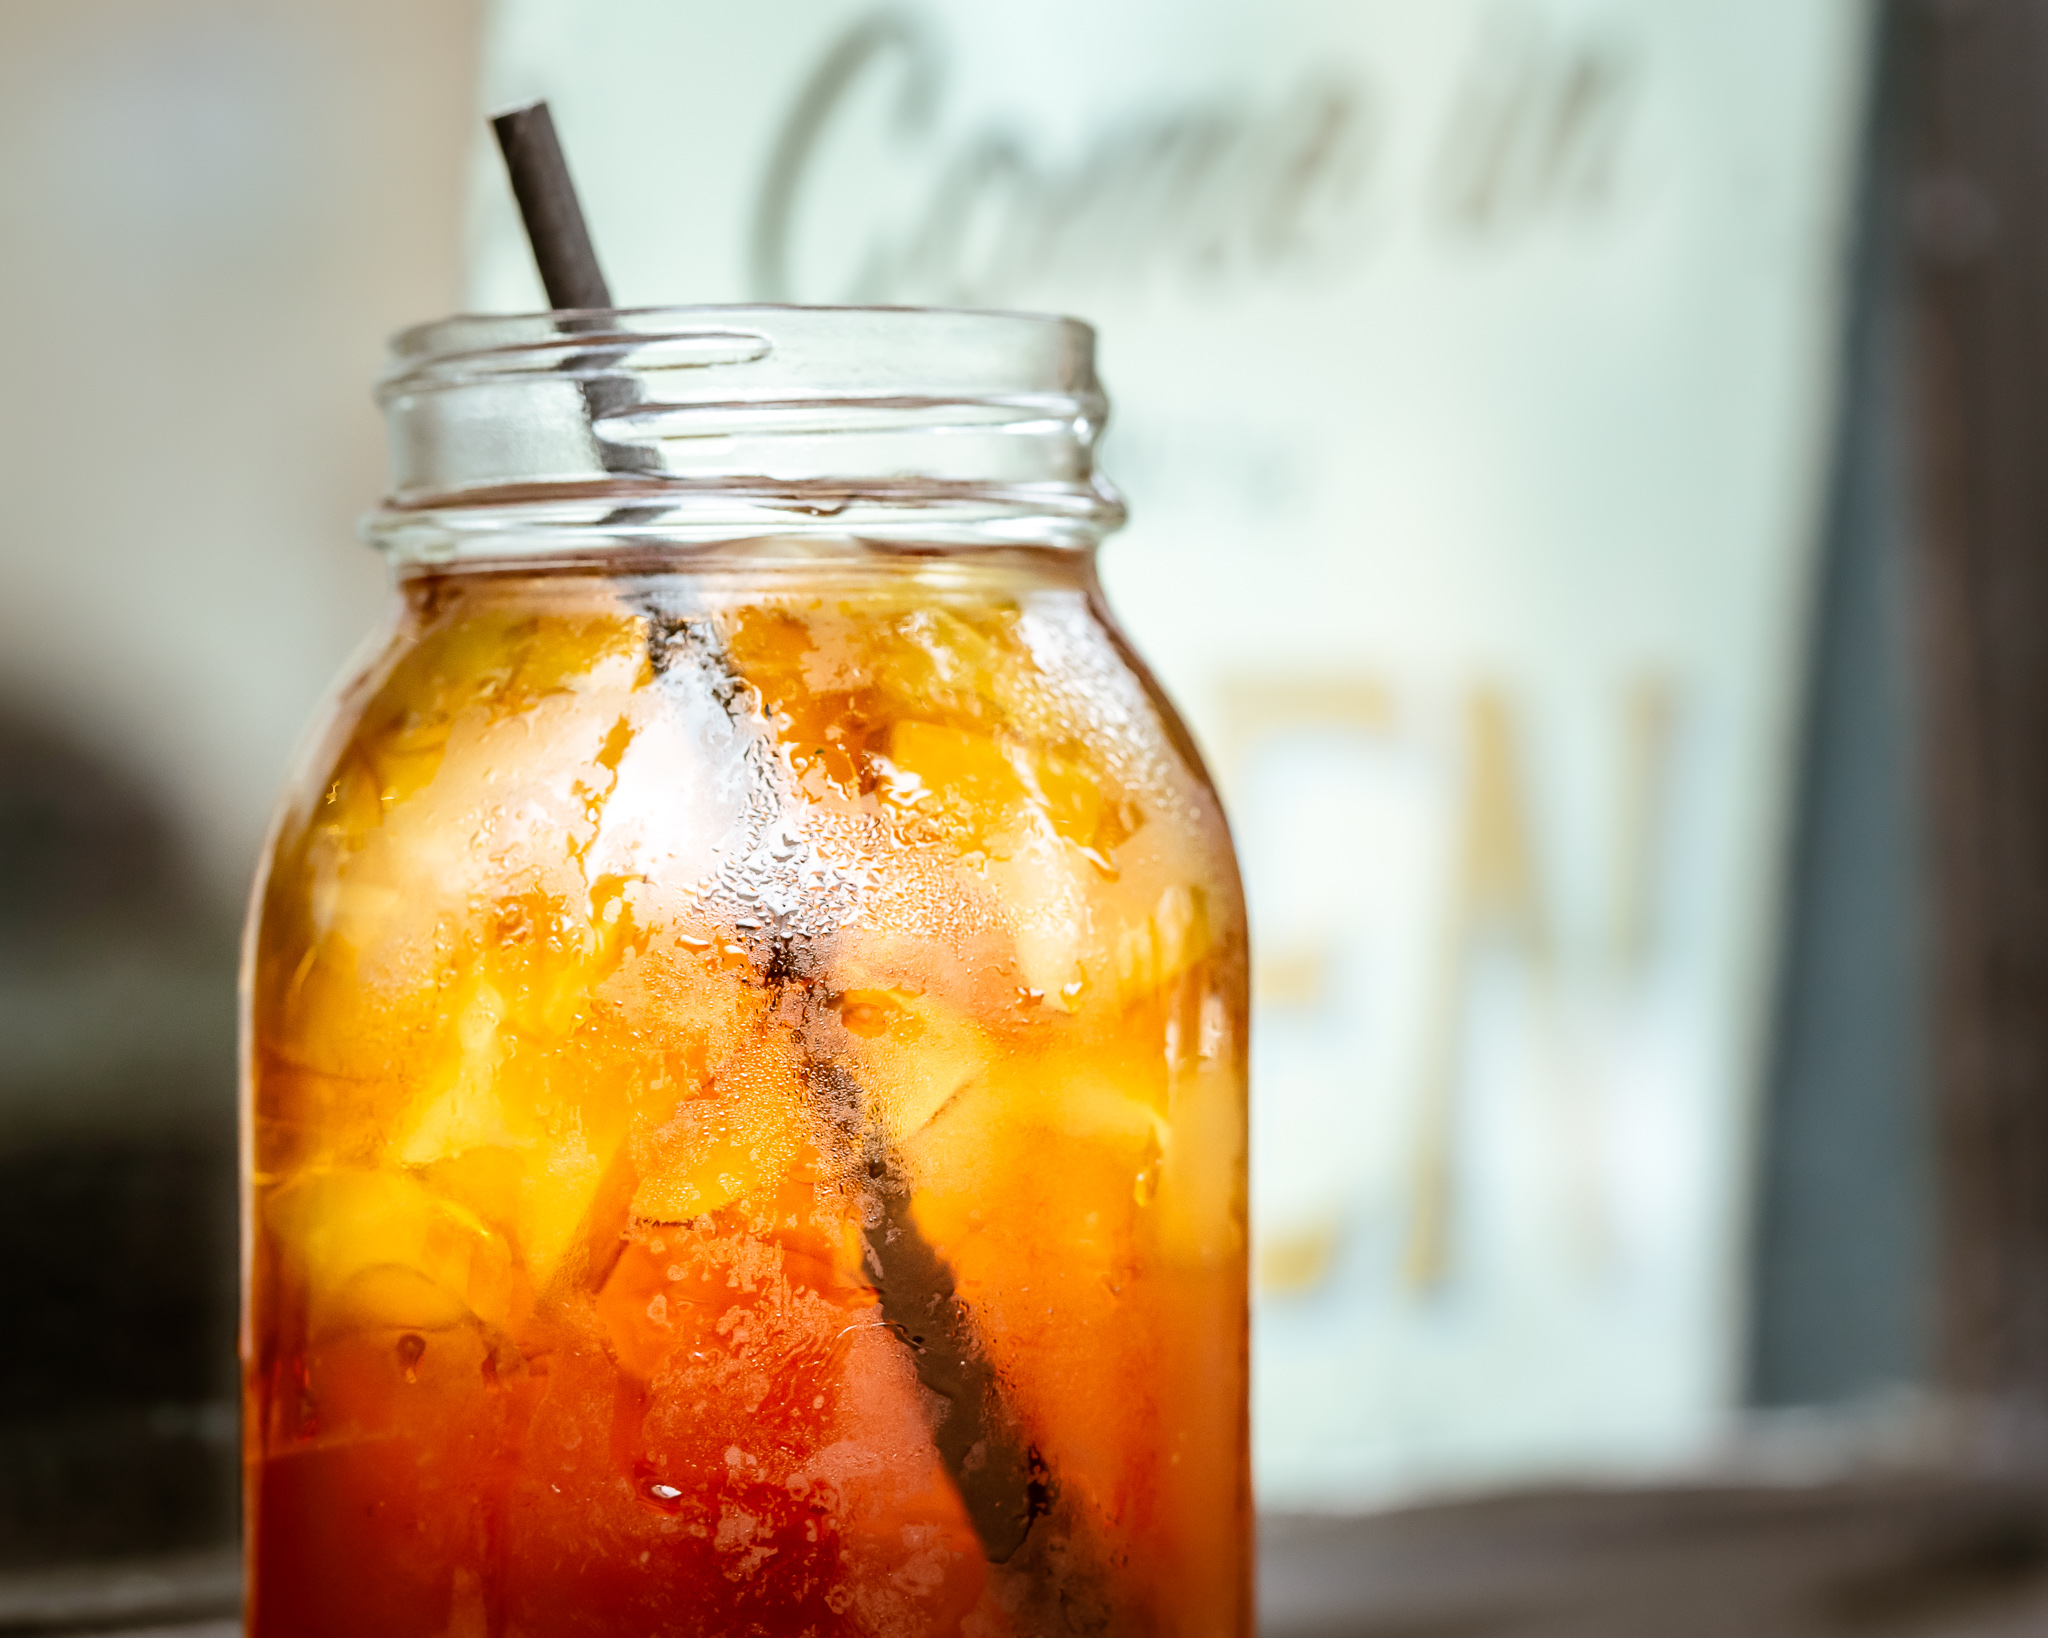 A jar of iced tea with a straw in it in front of a "come on in, we're open" sign